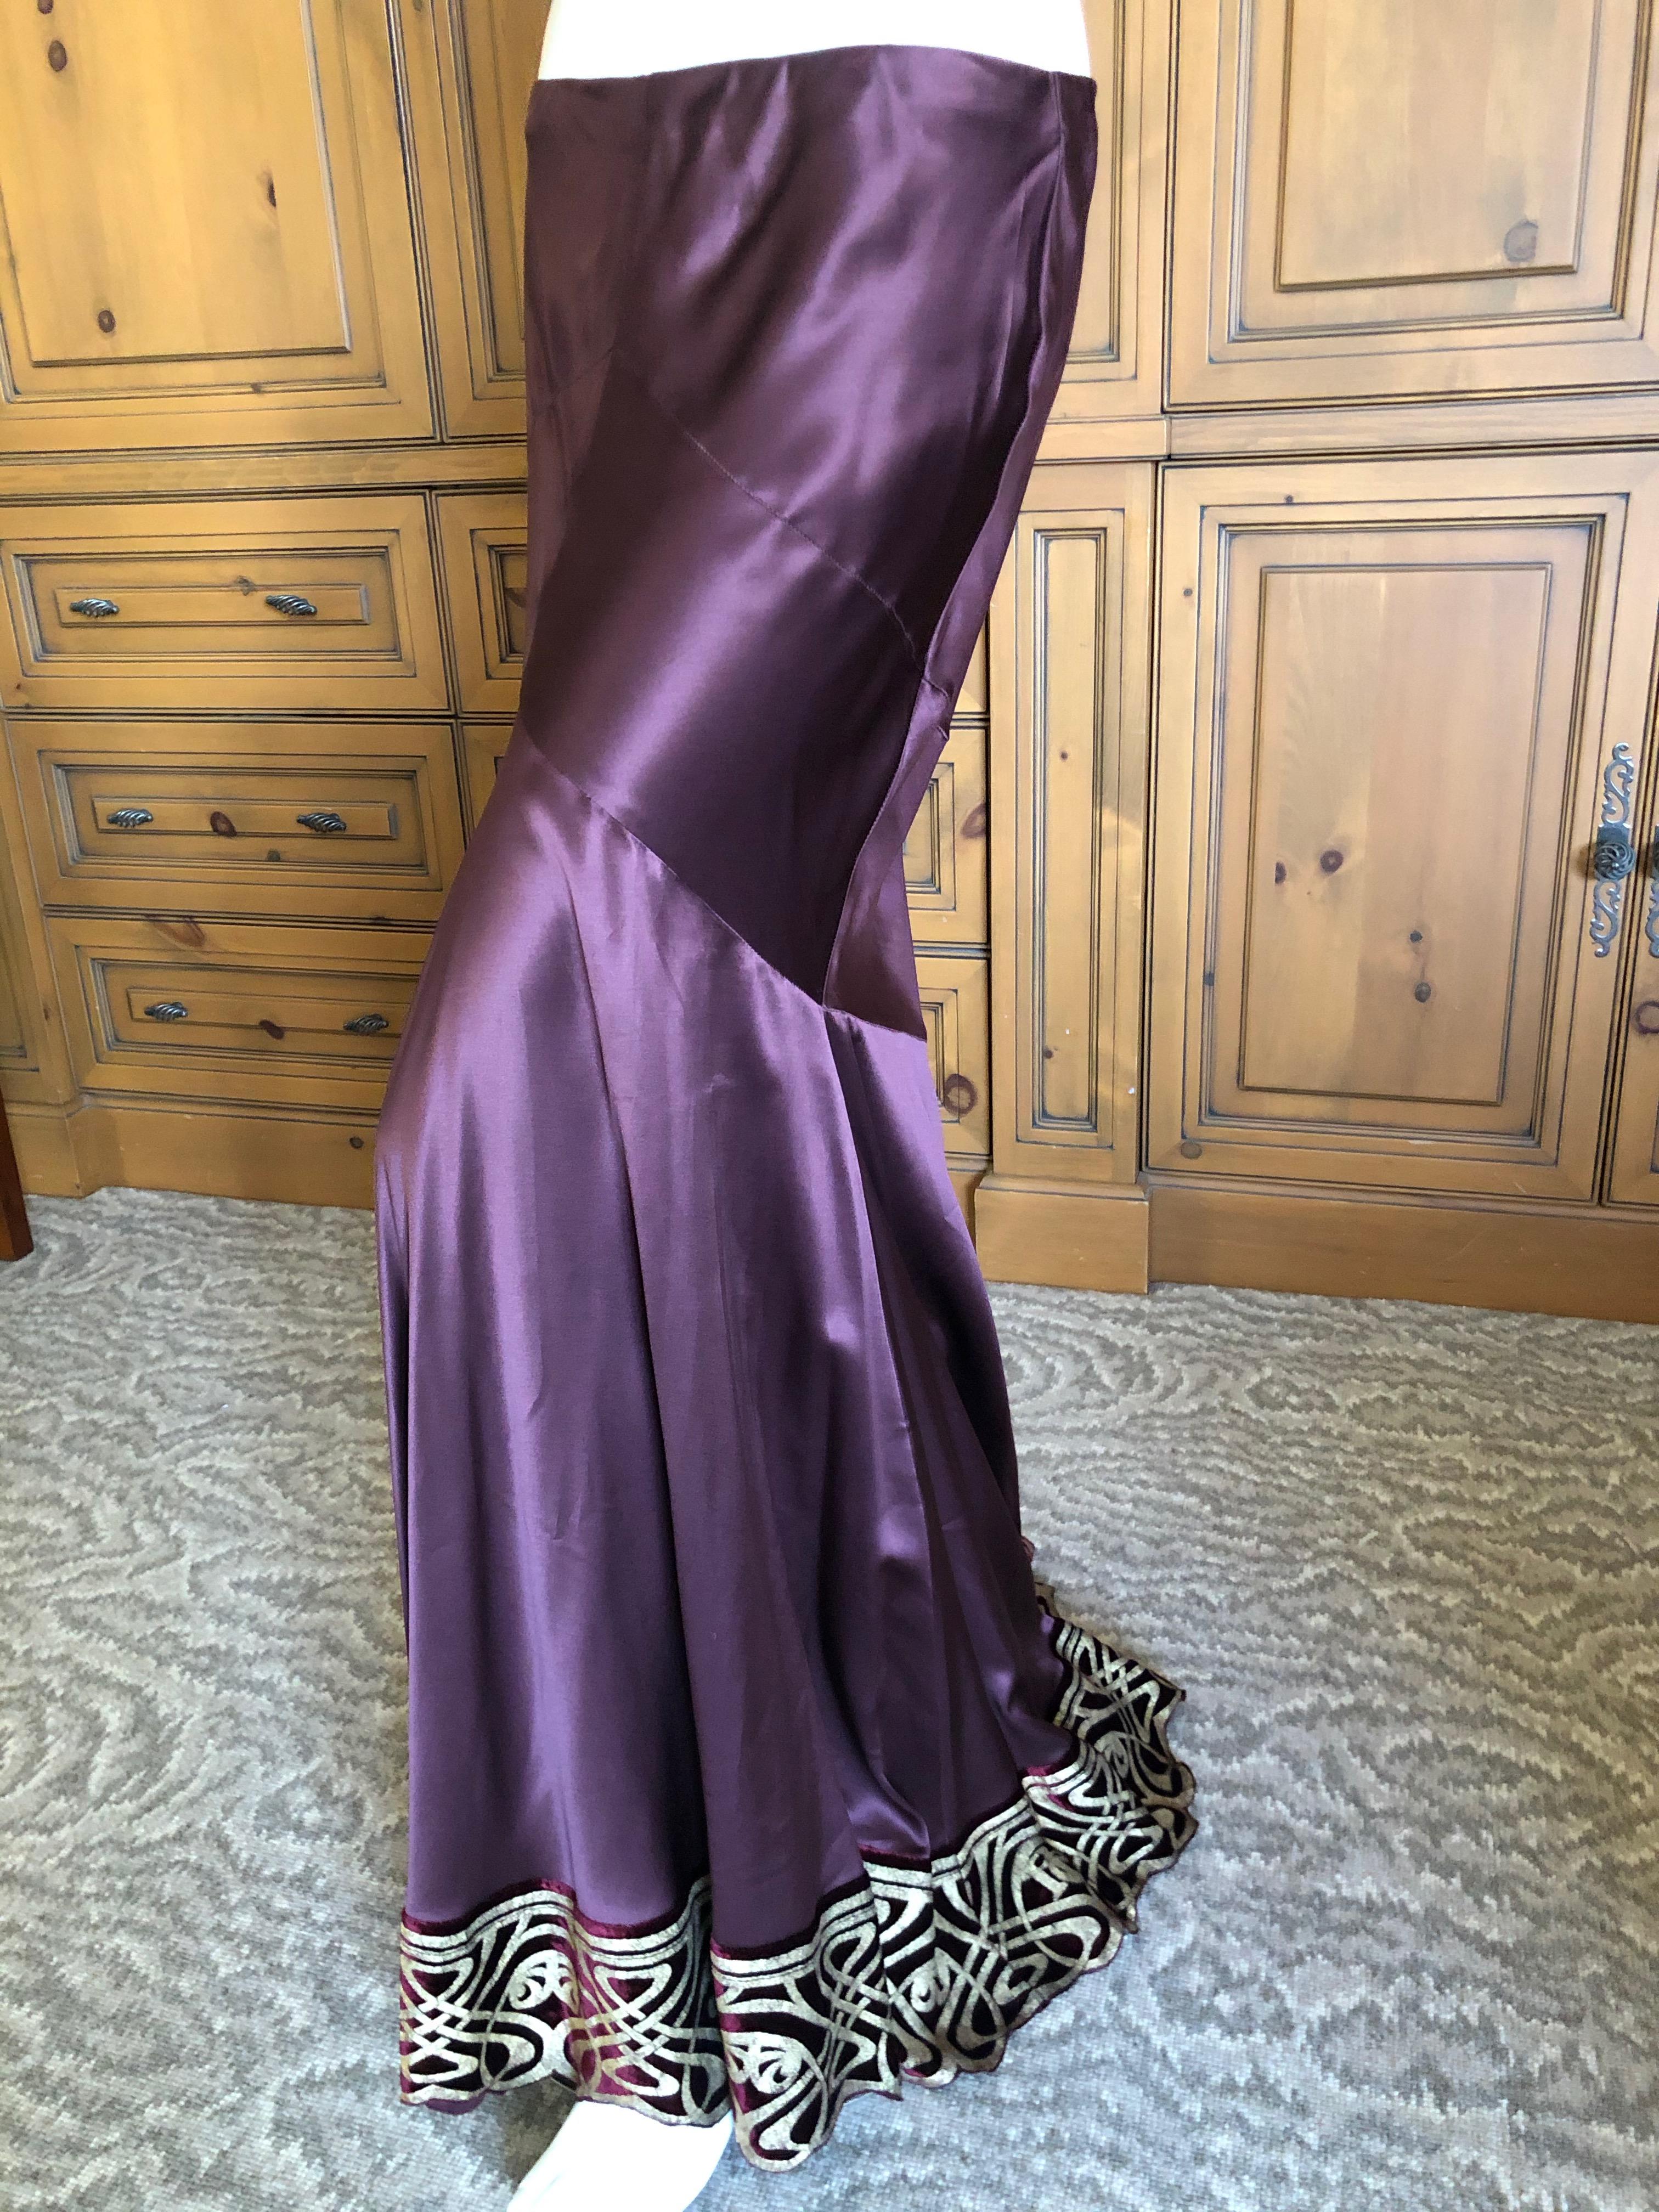 Roberto Cavalli Burgundy Vintage Silk Ball Skirt with Fortuny Pattern Gold Hem.
This is so pretty, it is voluminous. Elastic in the waist band.
Size 42
Waist 30